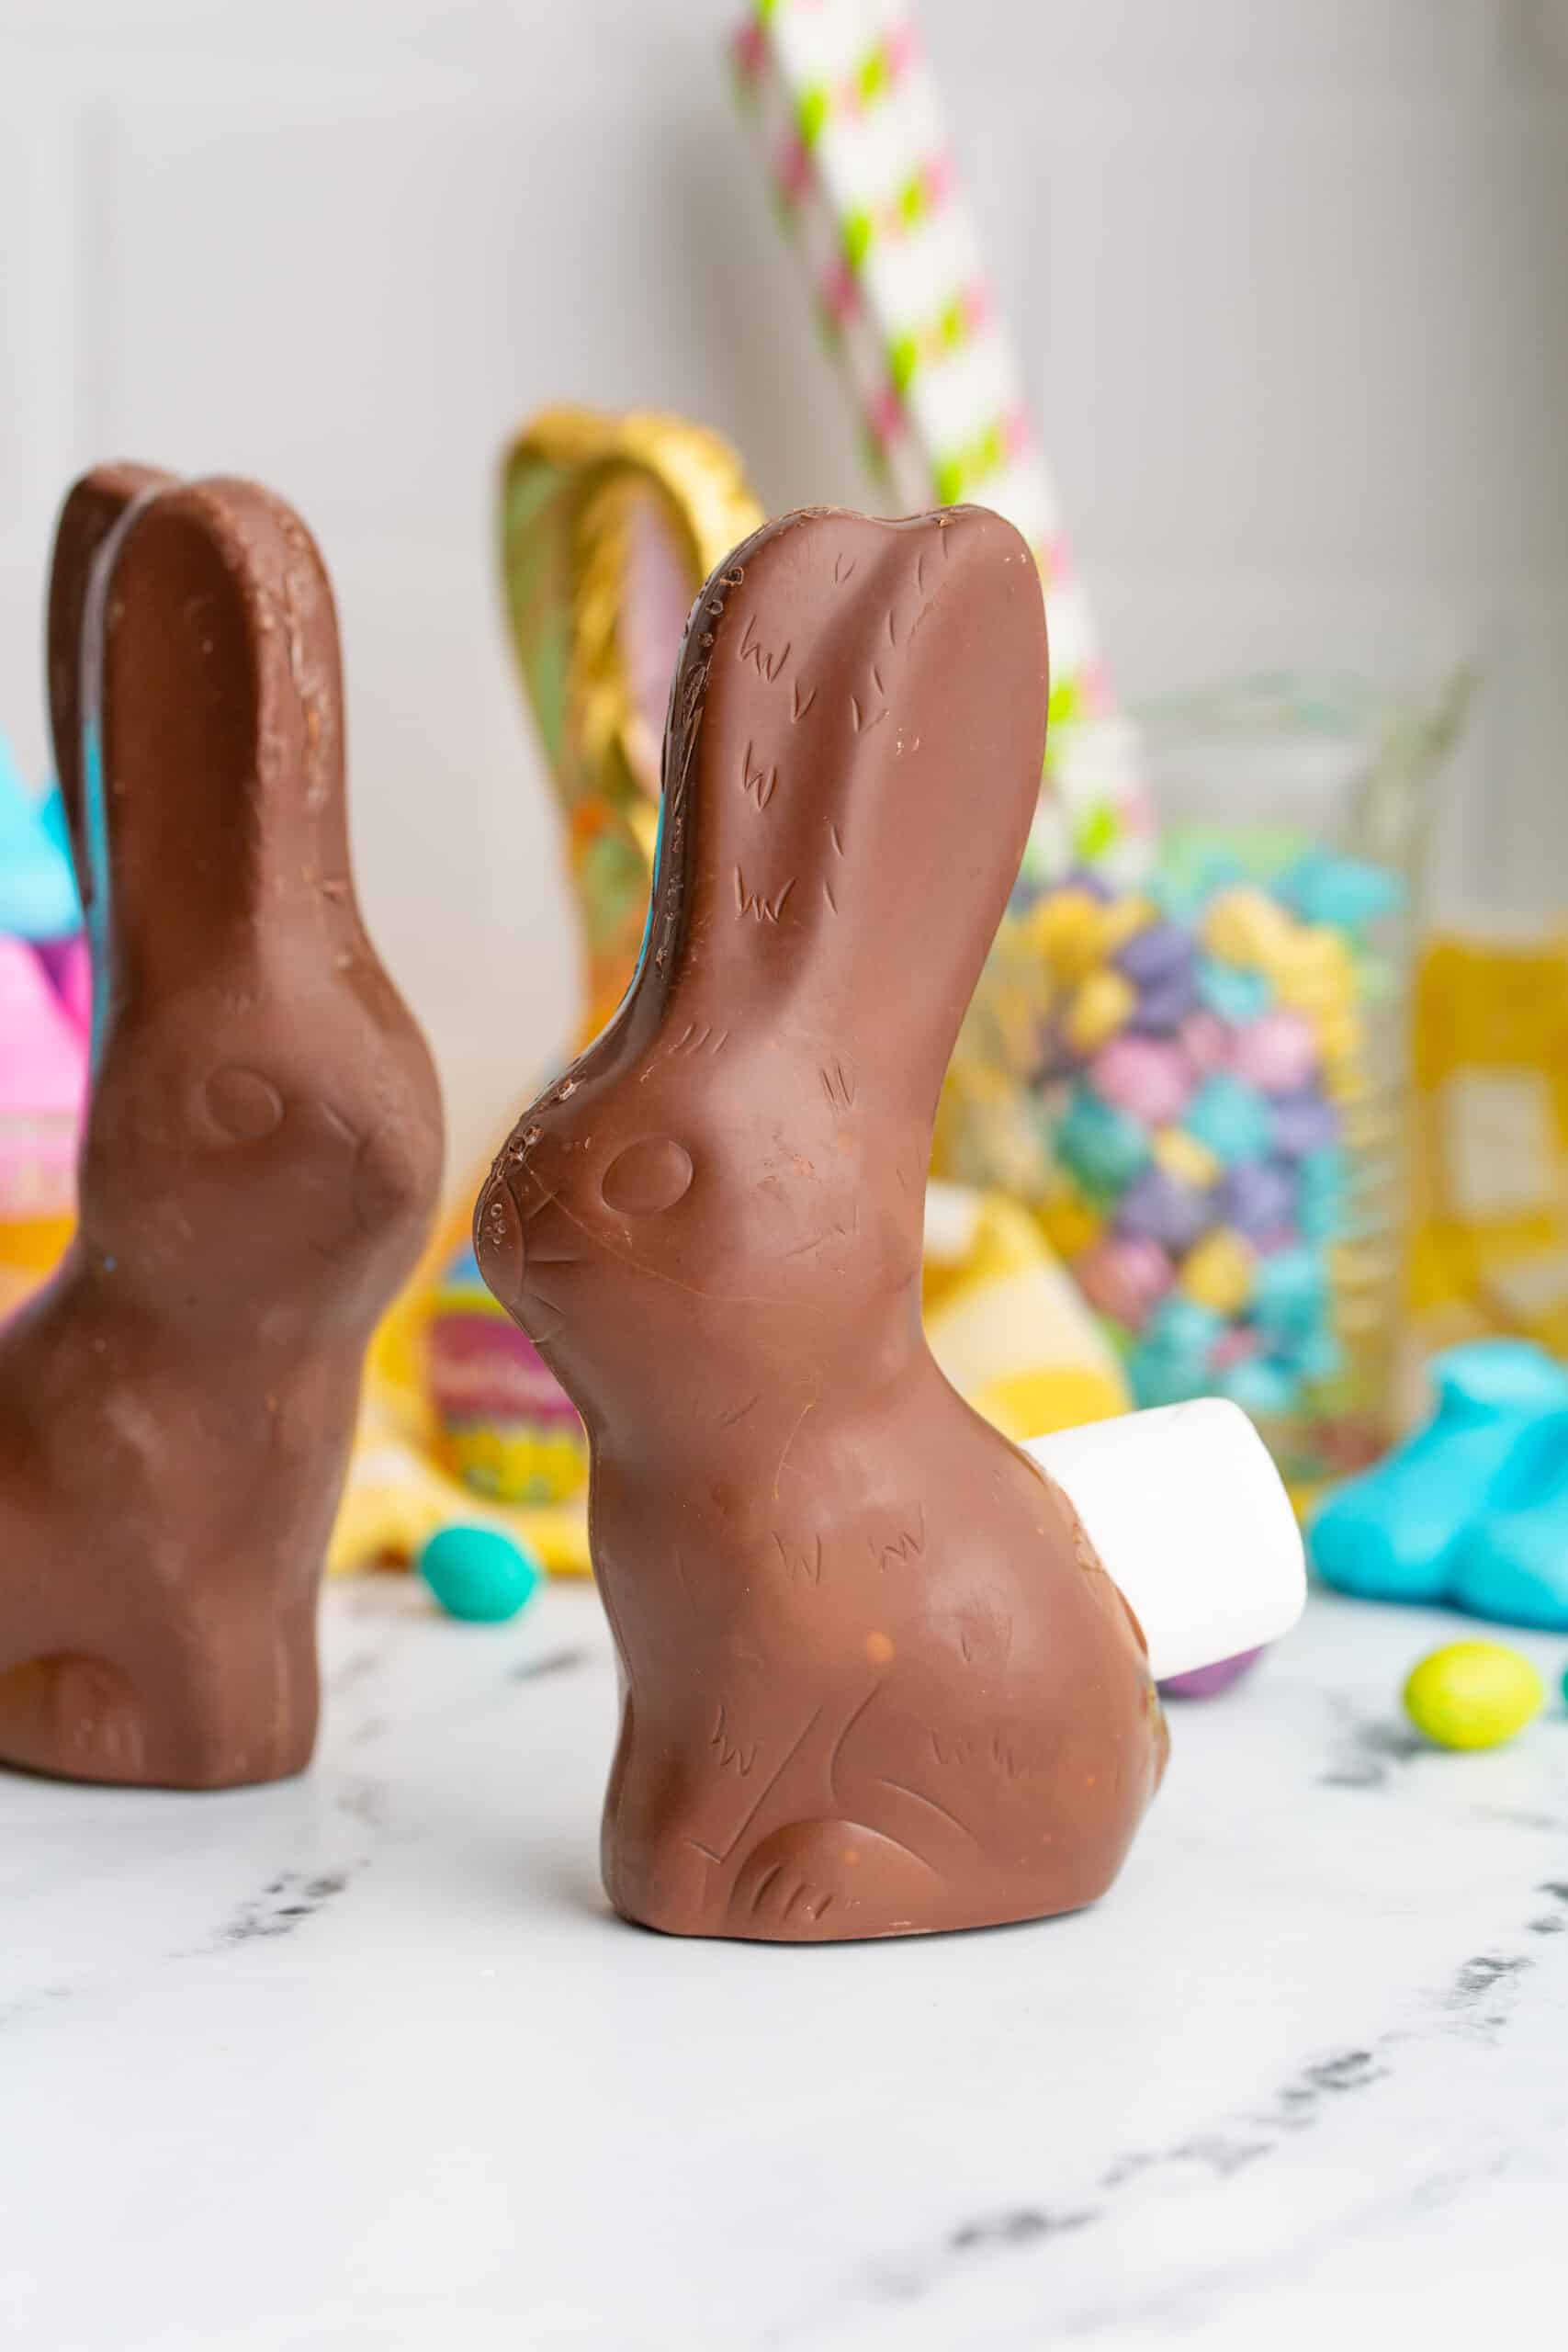 What to do with leftover chocolate easter bunnies: Candy Surprise Bunnies